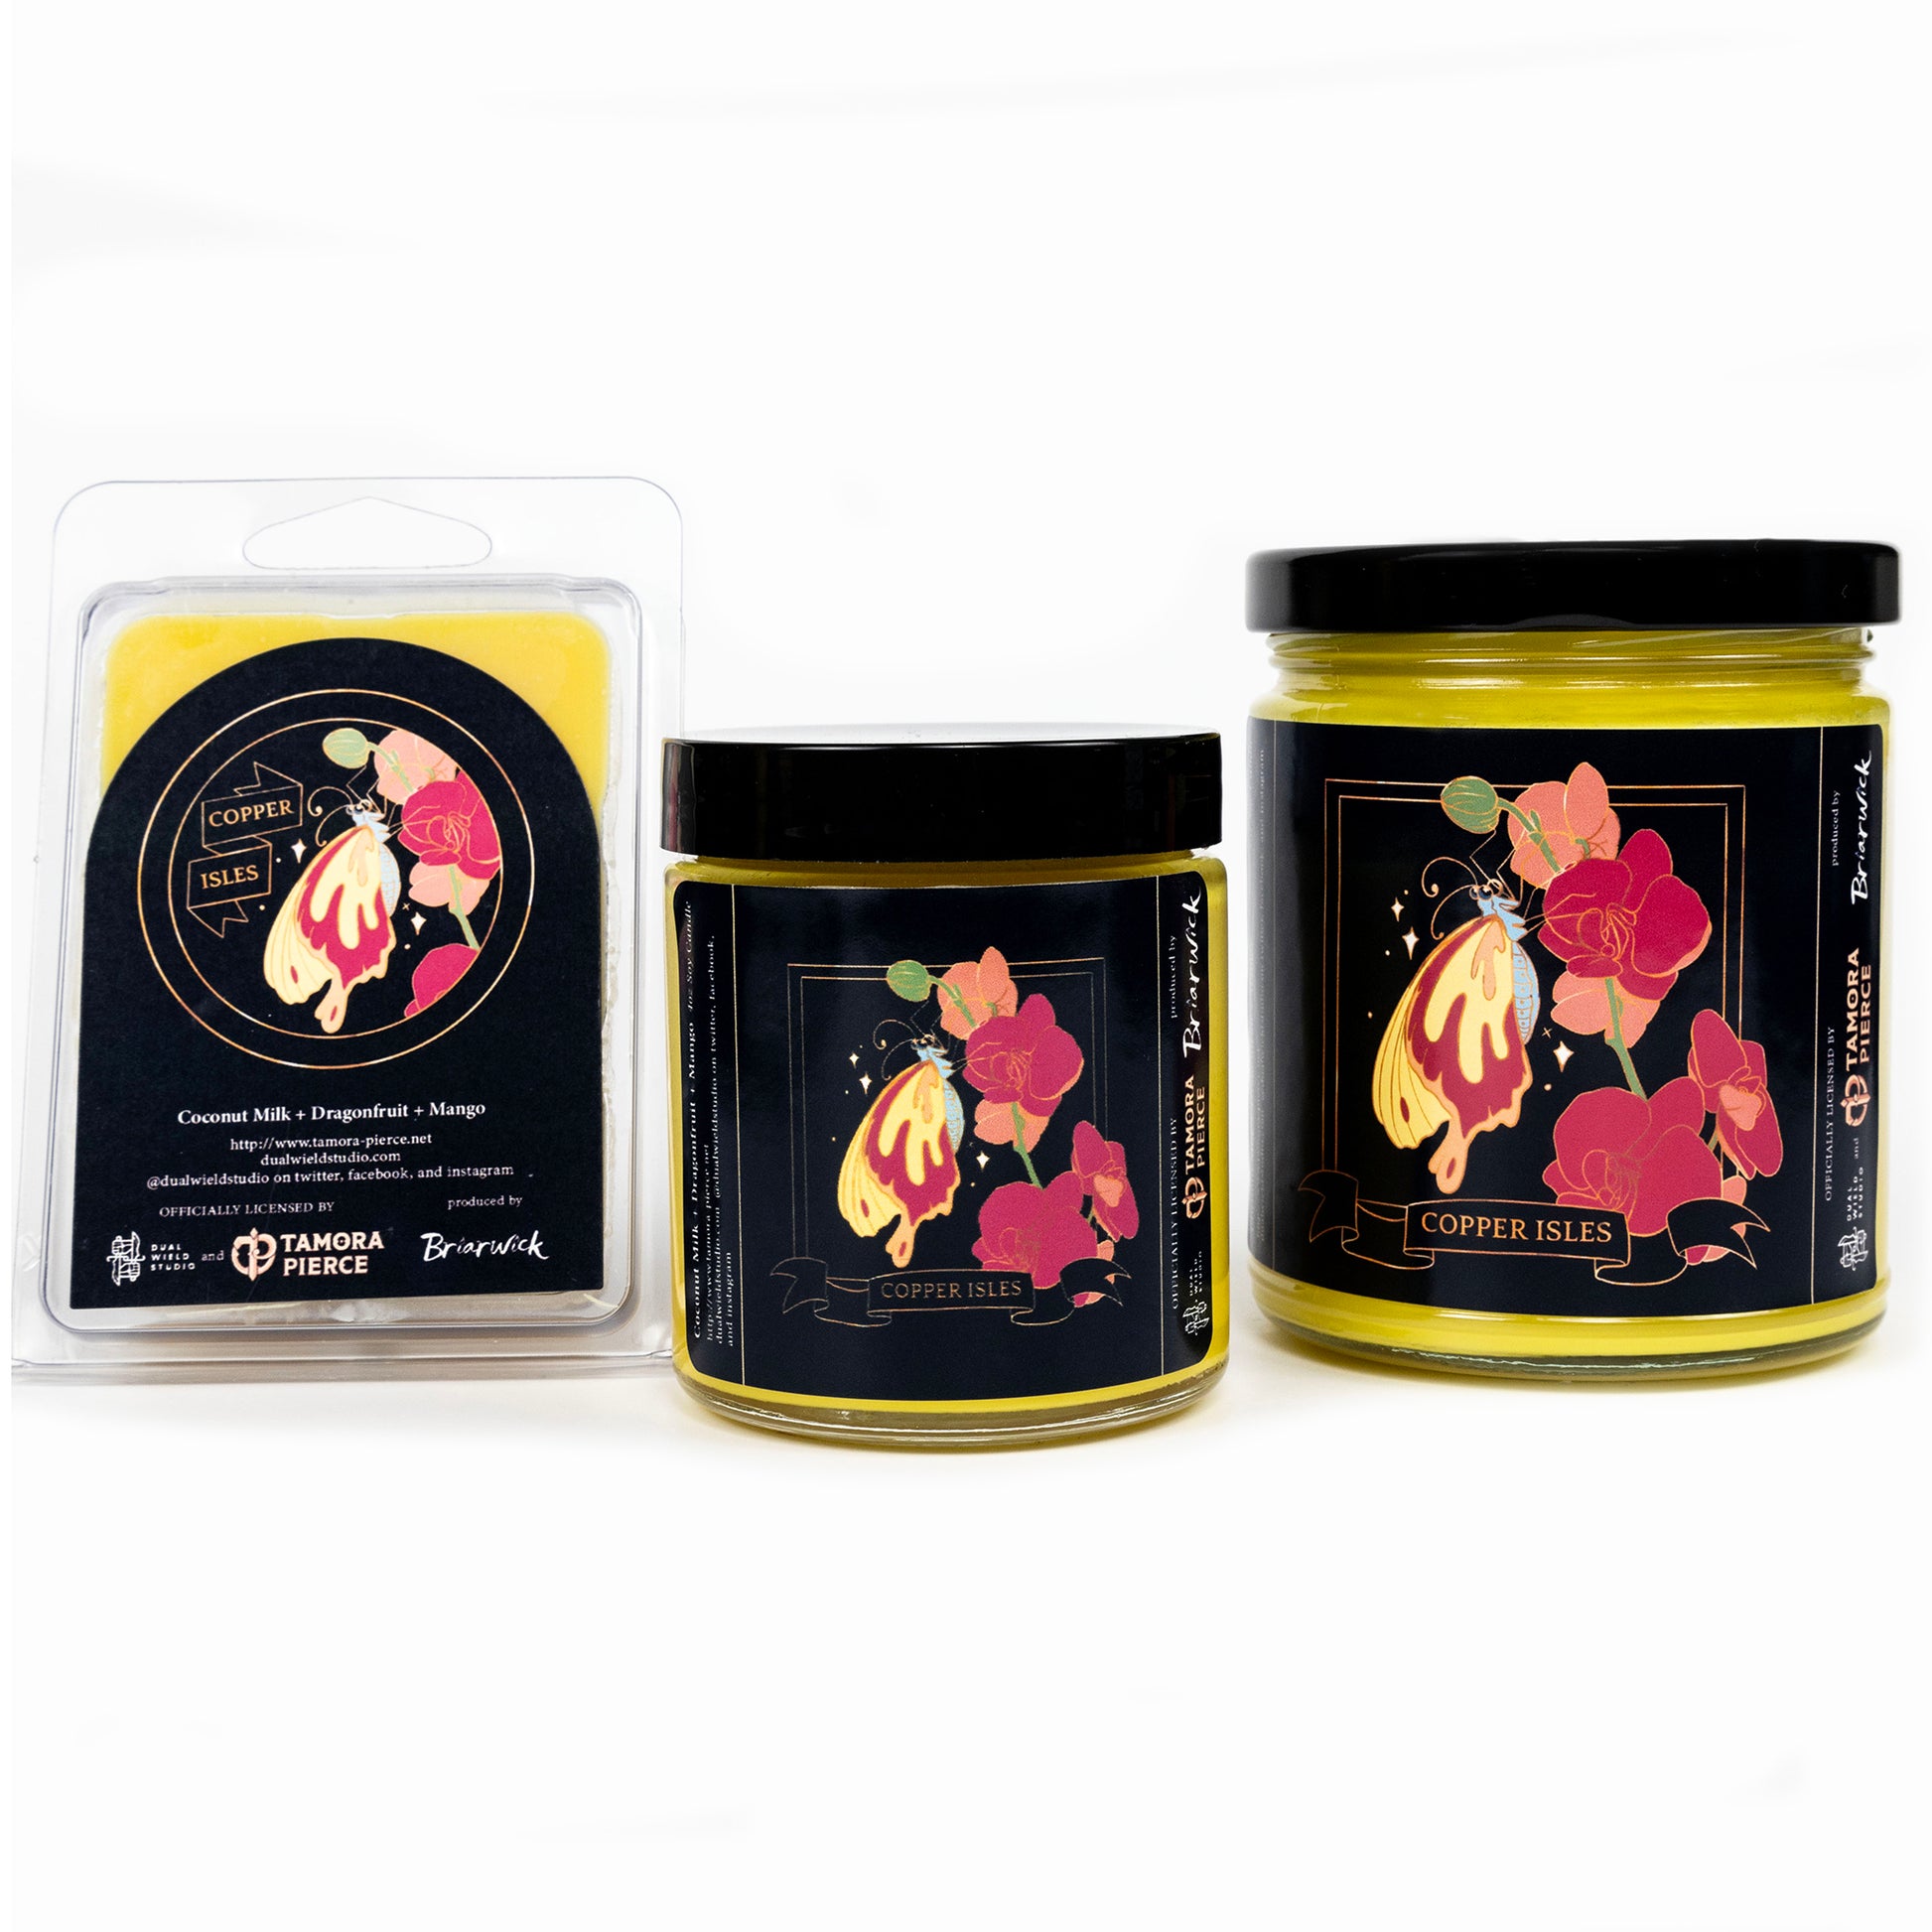 Full set of both Copper Isles candles and wax melts, all with marigold wax. The label illustration shows a yellow and red sparkling butterfly landing on red flowers. 